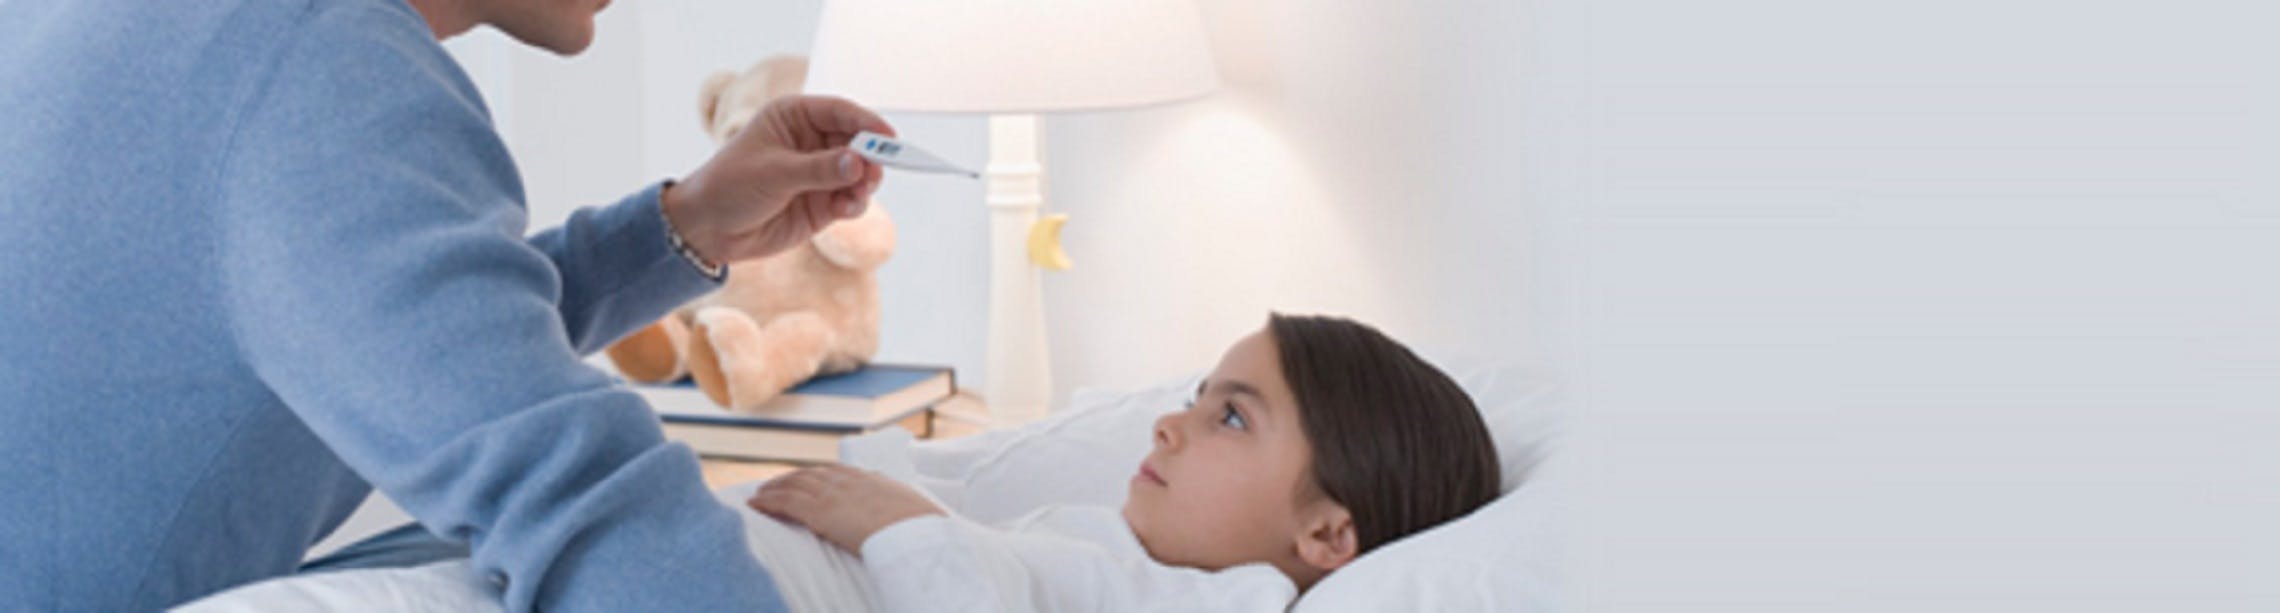 Does Your Child Have a Fever?